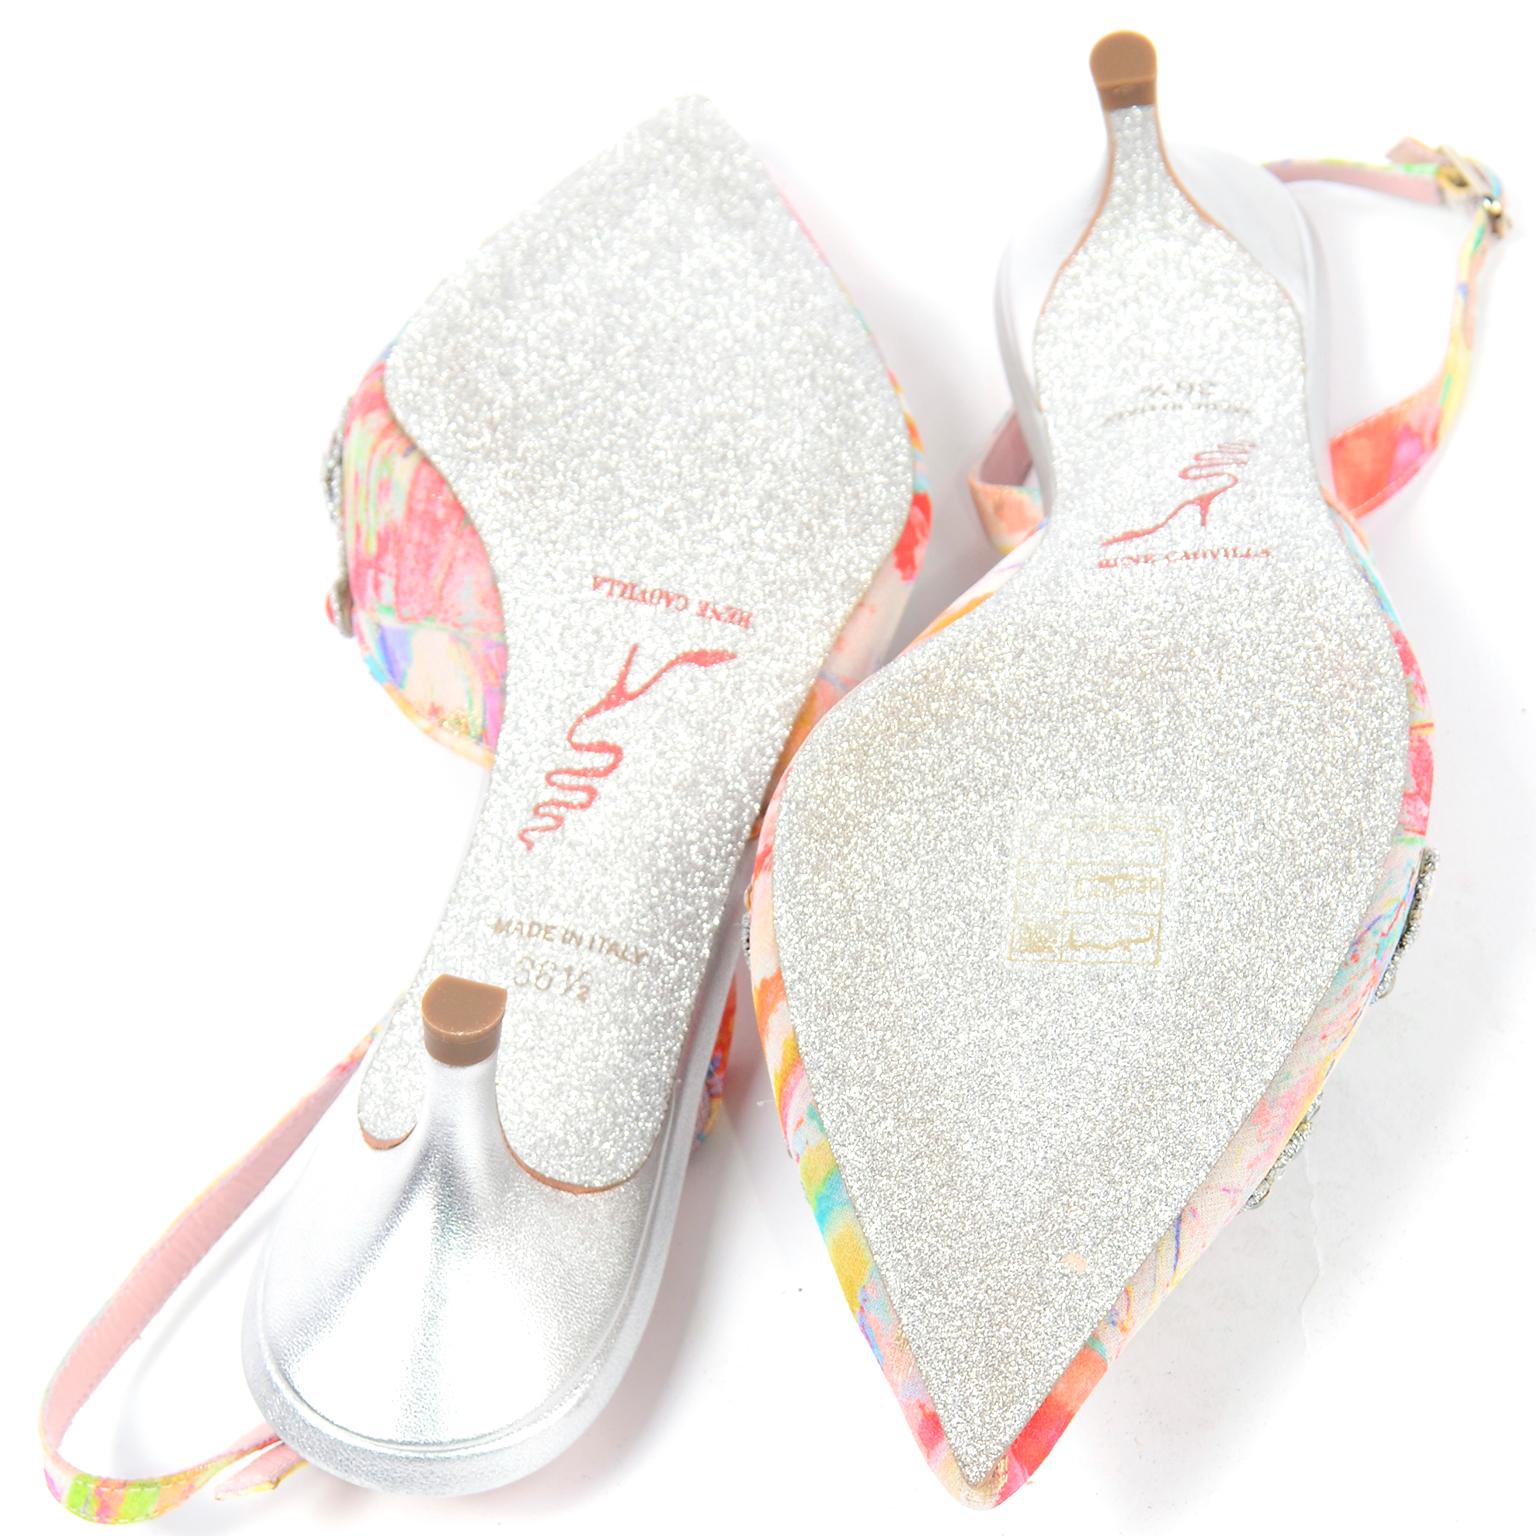 This is a sparkling pair of unworn Rene Caovilla slingback shoes in a pink and yellow floral with multi colored jewels on the toe box. Made of fabric and lambskin leather, these shoes are so magical with their silver sparkle glitter soles and on top